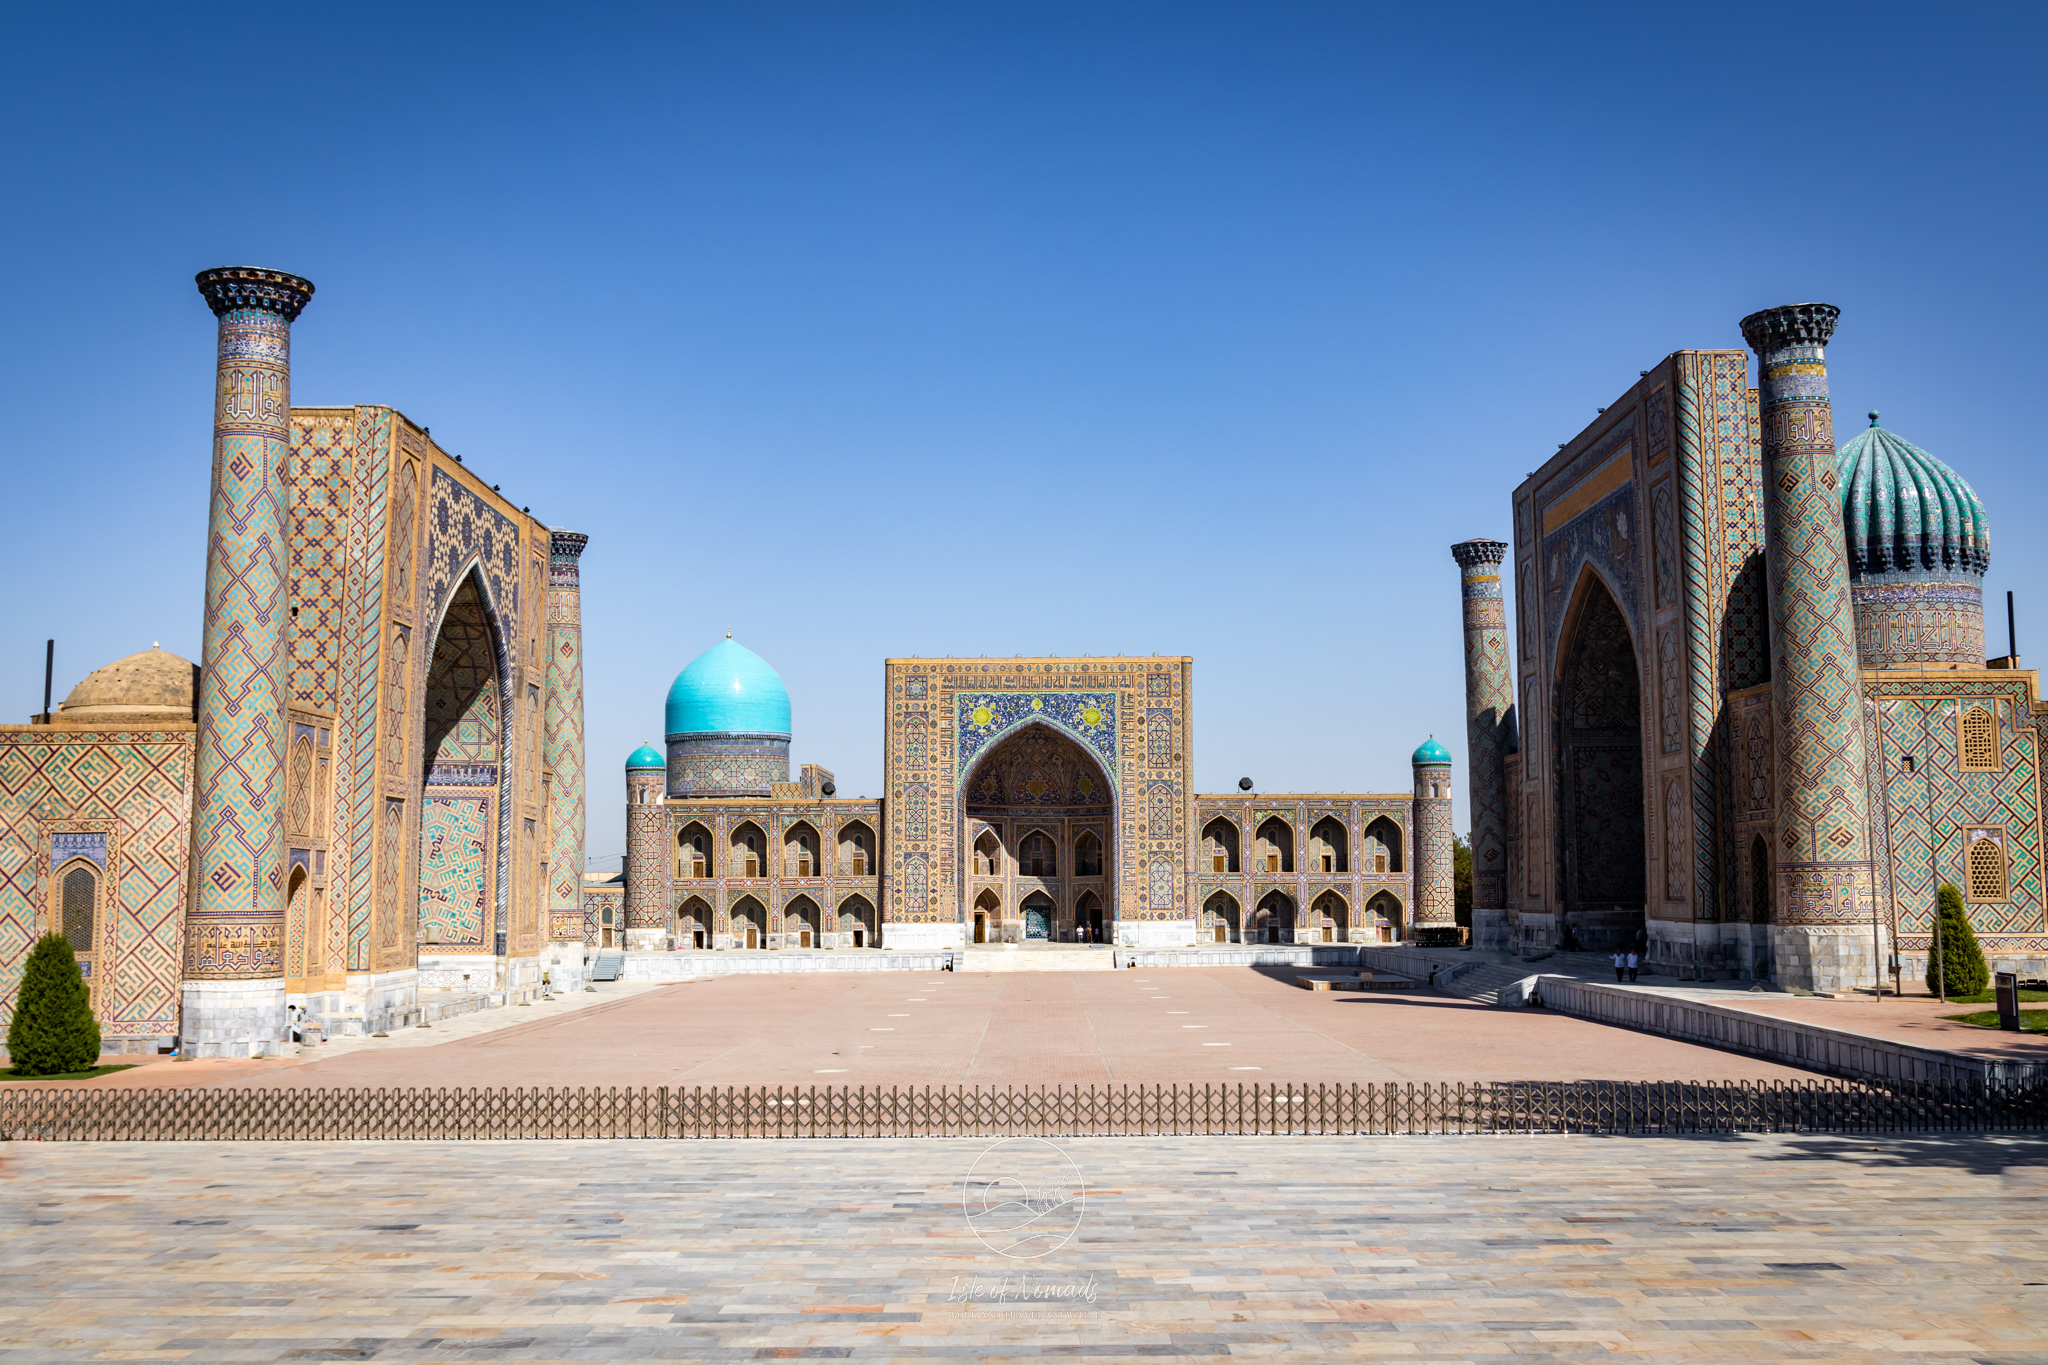 The famous registan in Samarkand was originaly built in the 15th and 17th centuries